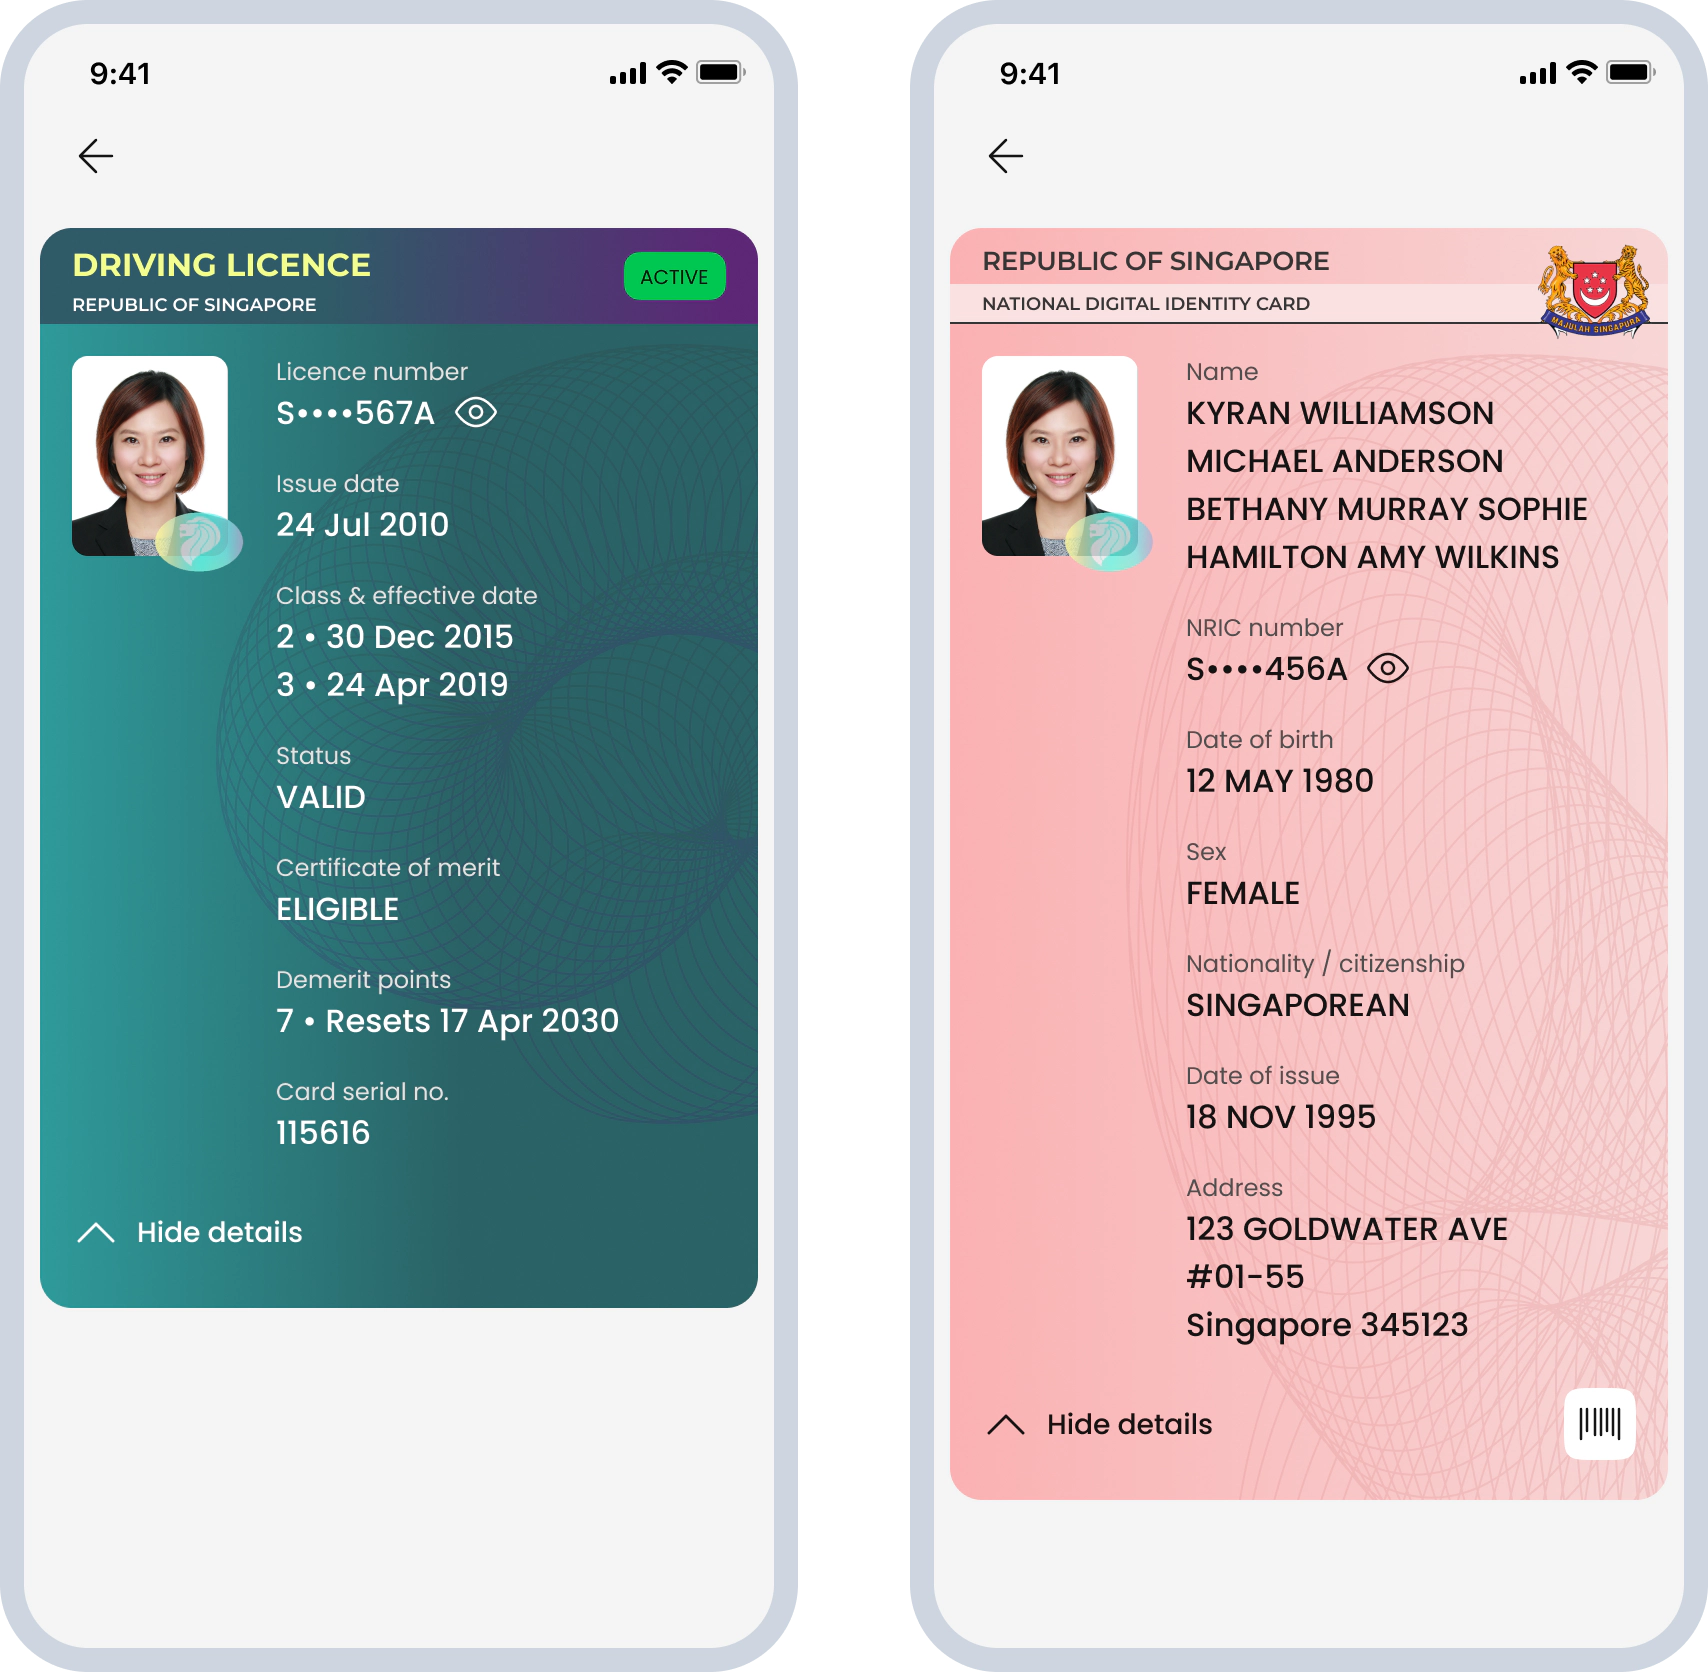 Image showing two screens, driving license and NRIC, with no repeated information between them.